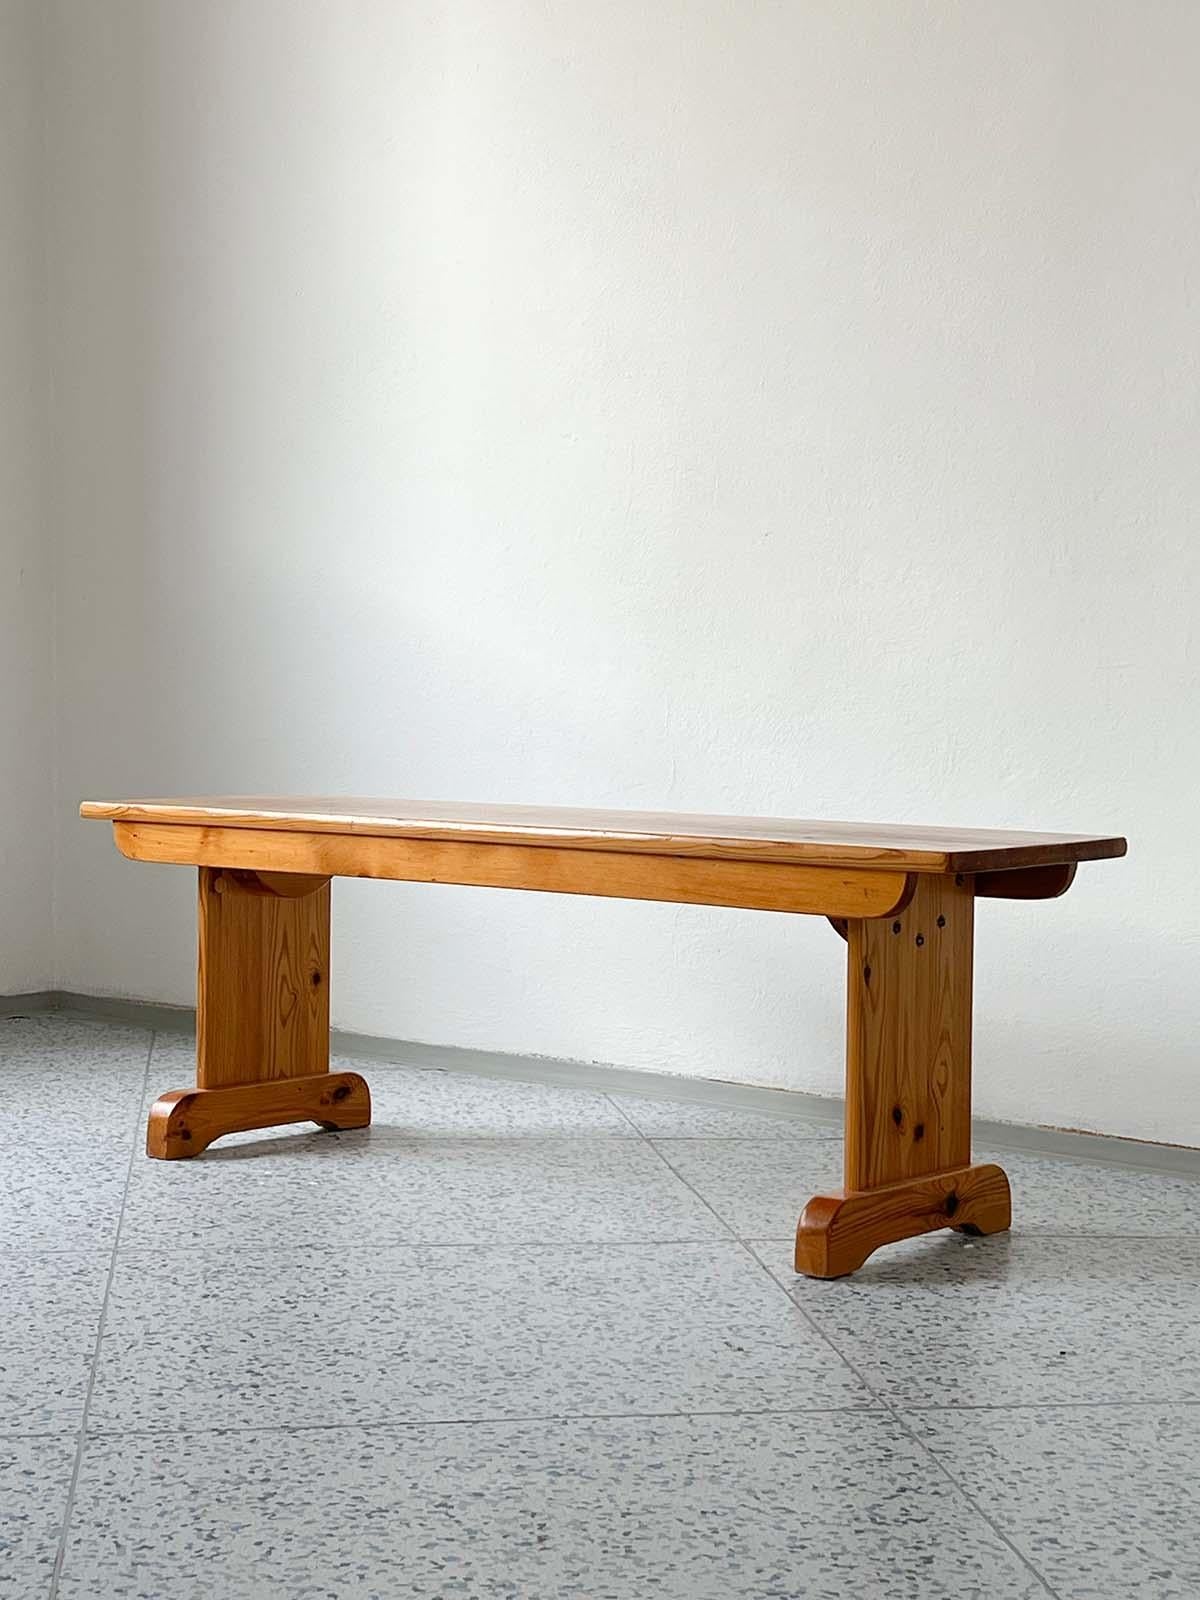 Scandinavian pine wood bench or side table, made in Sweden, 1940s.

This rectangular bench or side table is modest, featuring a very classic look and feel designed by a Swedish cabinetmaker. Thanks to the simplicity of its design and the use of